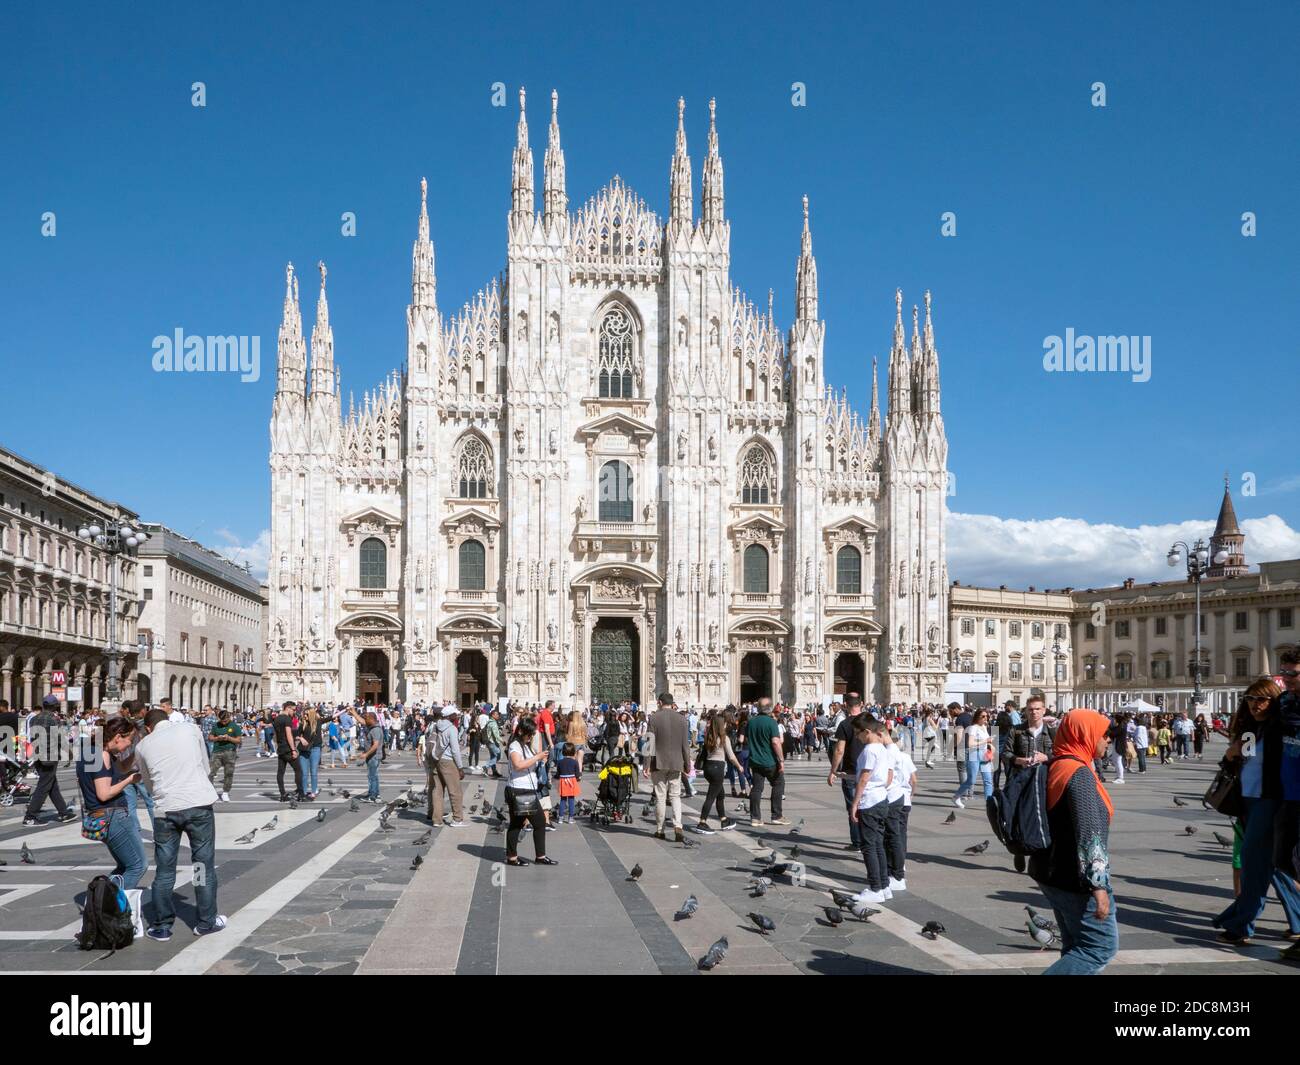 Crowds of tourists in front of the West Façade of Milan Cathedral  - Duomo di Santa Maria Nascentre - Milan, Lombardy, Italy, Europe. Stock Photo